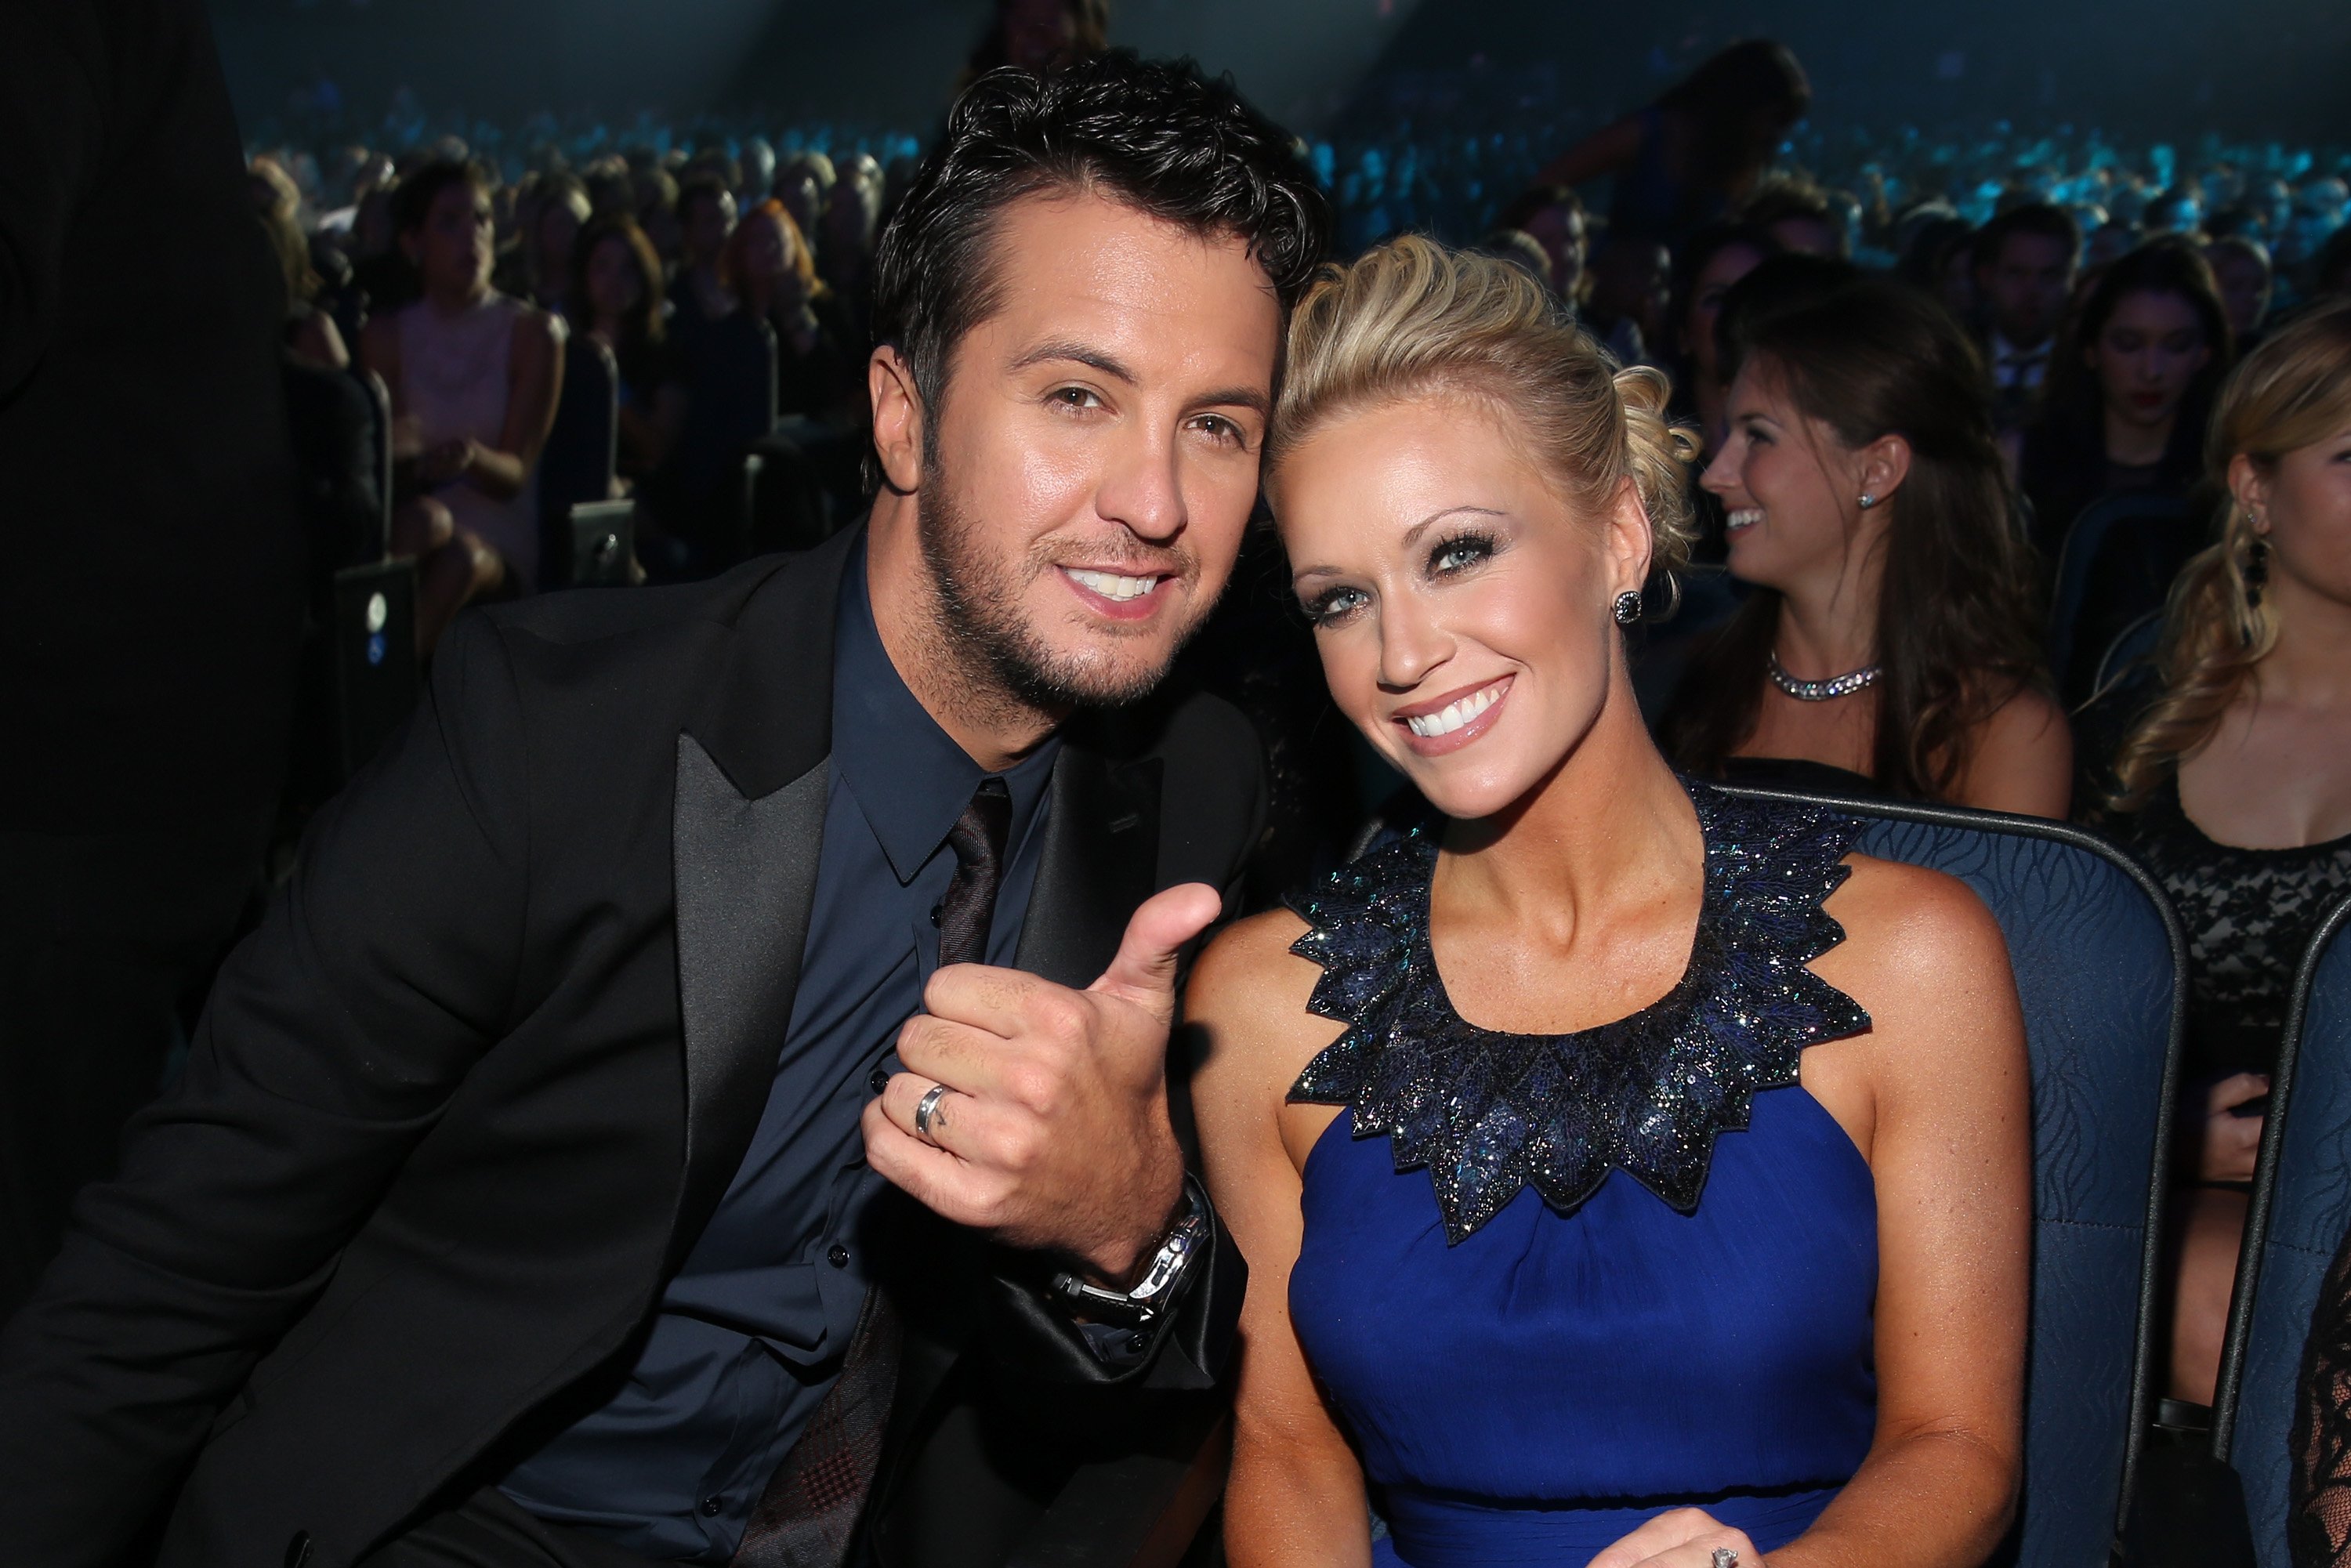 Luke Bryan and Caroline Bryan attend the 40th American Music Awards on November 18, 2012 in Los Angeles, California. | Source: Getty Images